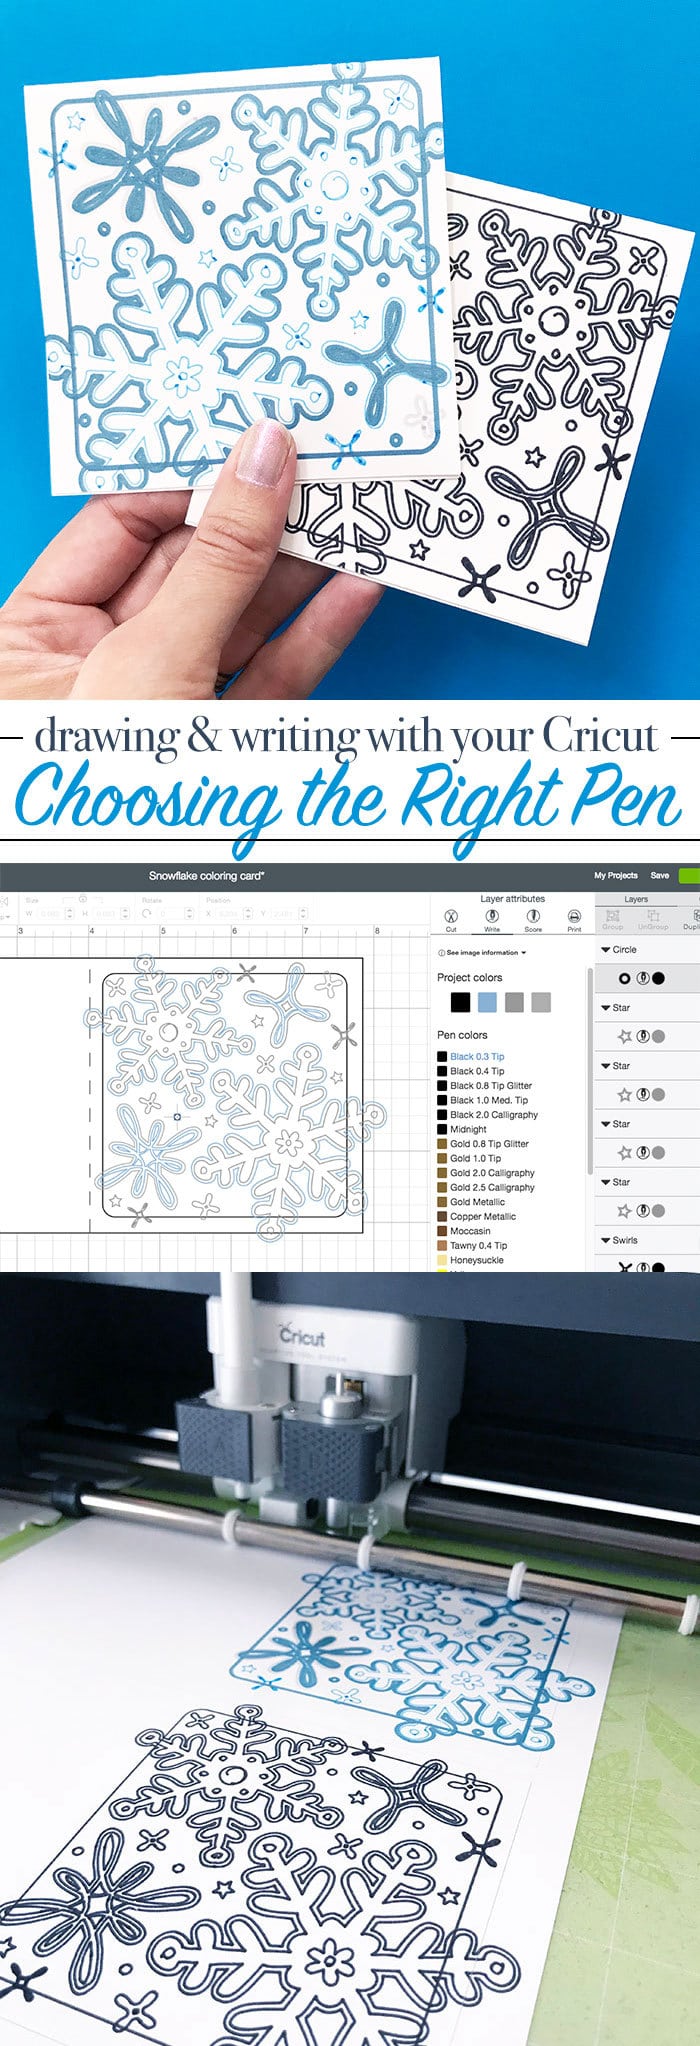 Choosing the right pen to use with your Cricut drawing project